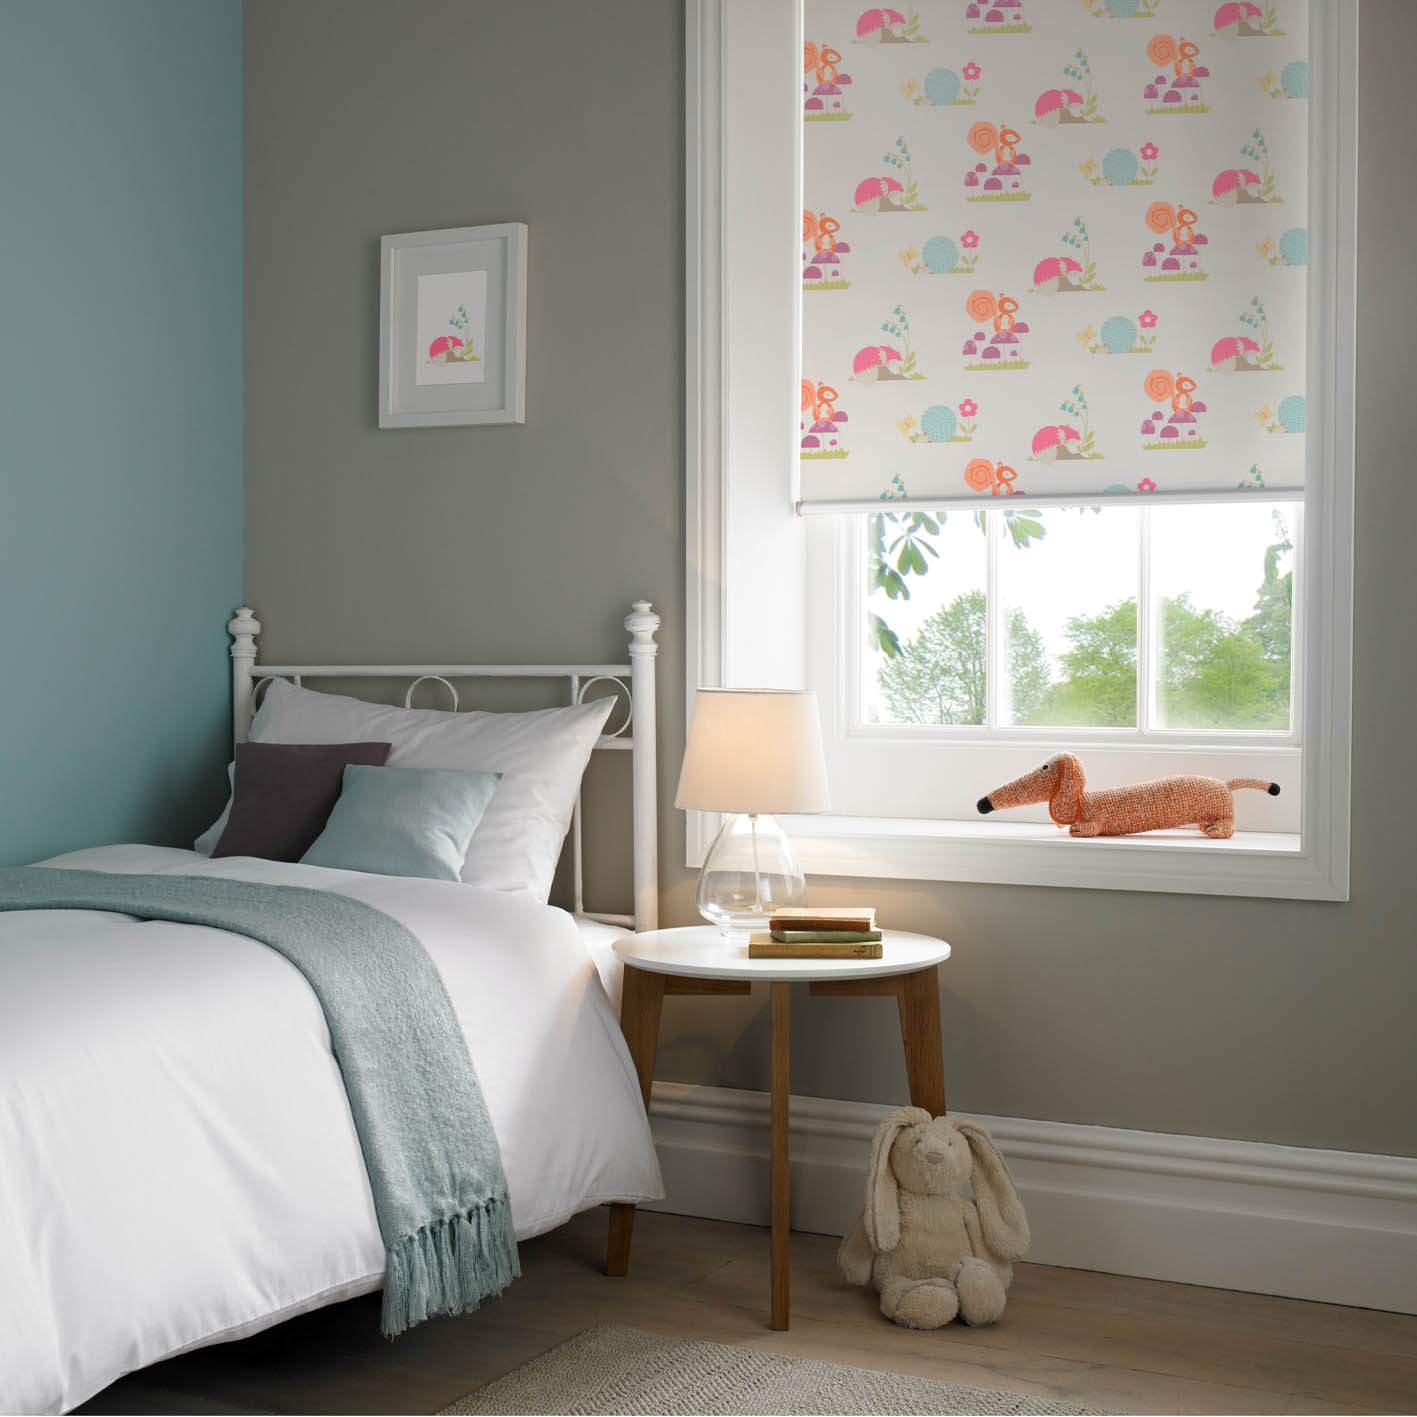 Kids Room Blinds
 Roller Window Blinds with ULTRA one touch control Appeal